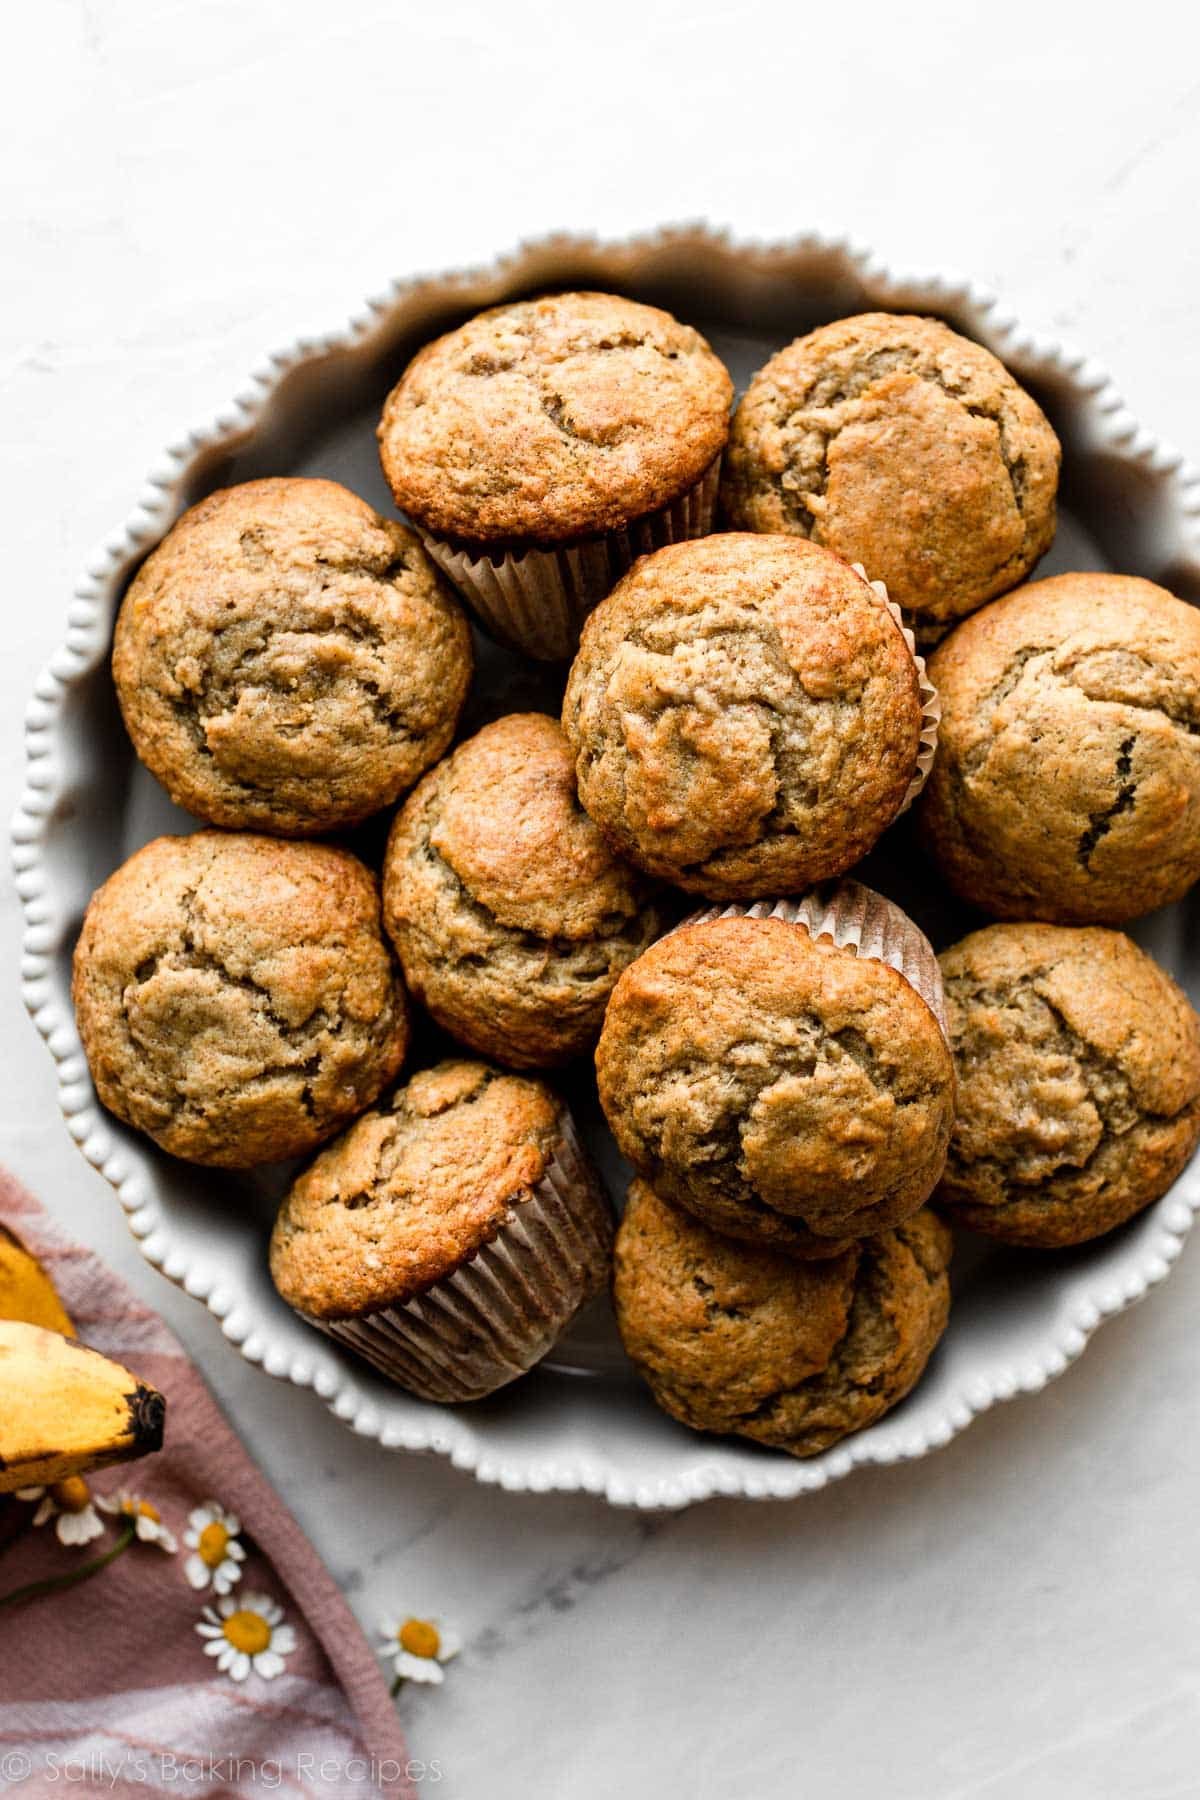 banana muffins piled together in white baking dish.